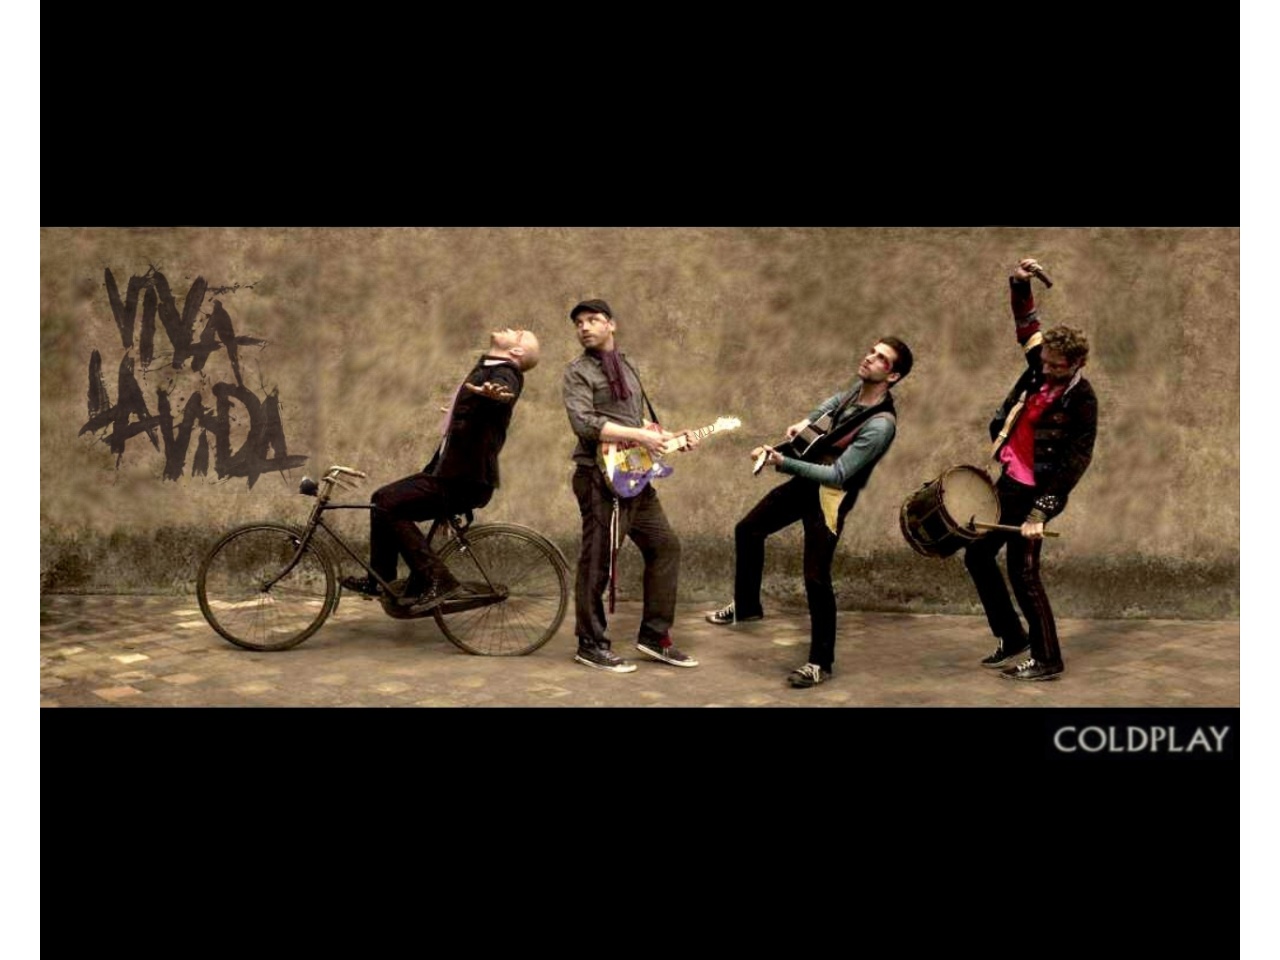 Coldplay nissan #3